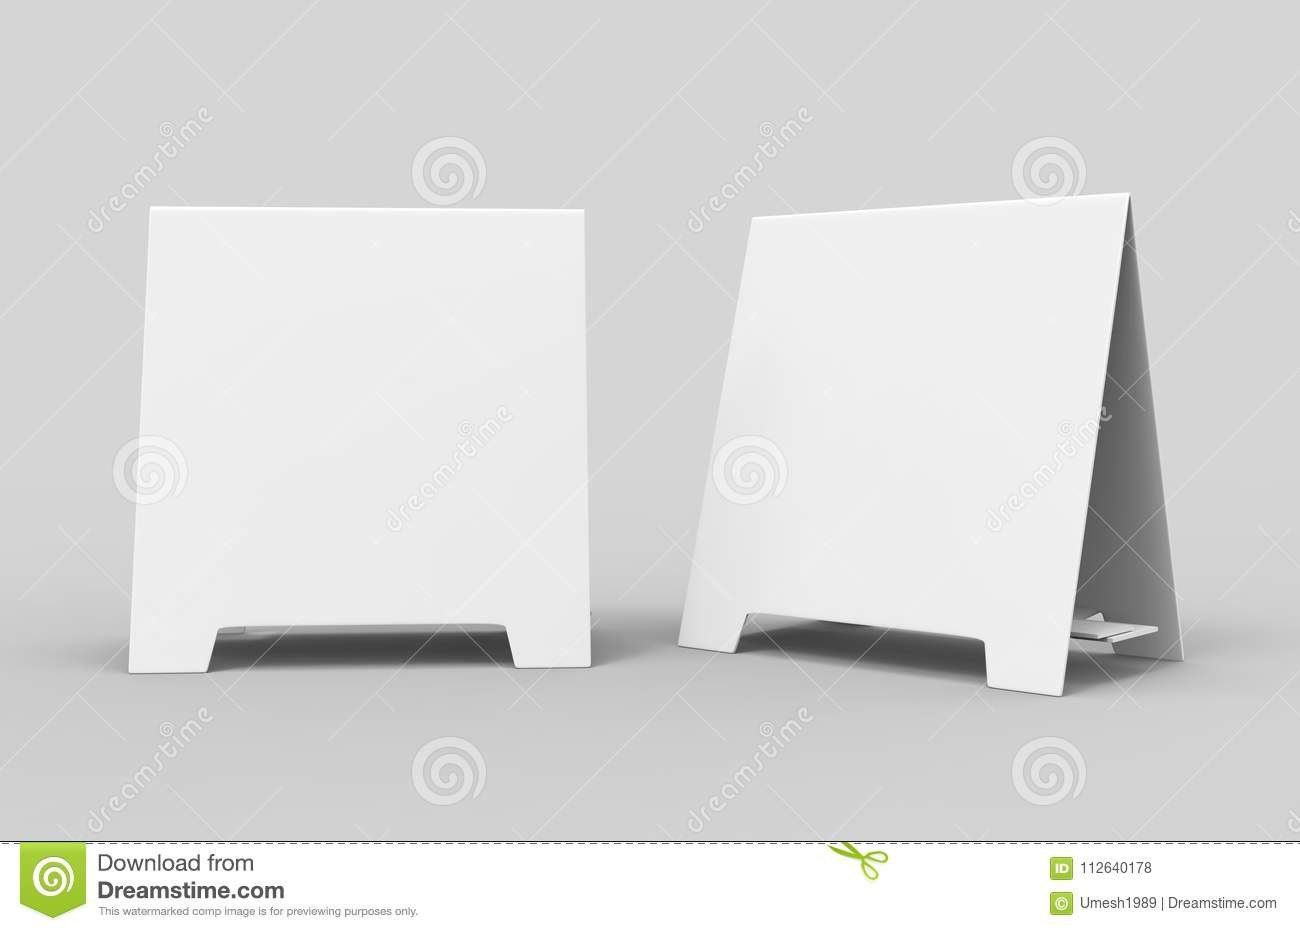 Tablet Tent Card Talkers Promotional Menu Card White Blank Empty For regarding Blank Tent Card Template